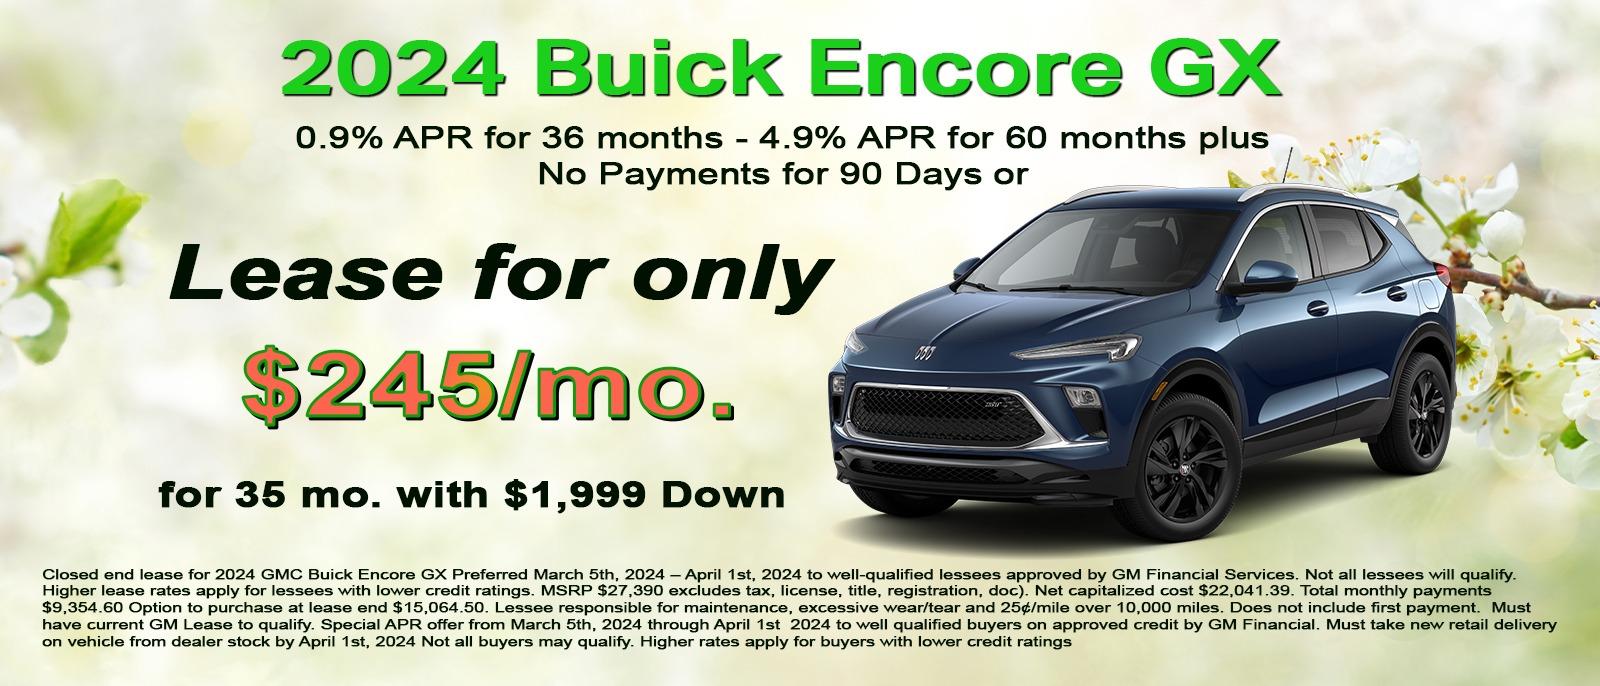 Lease your new Buick Encore GX for only $245 per month